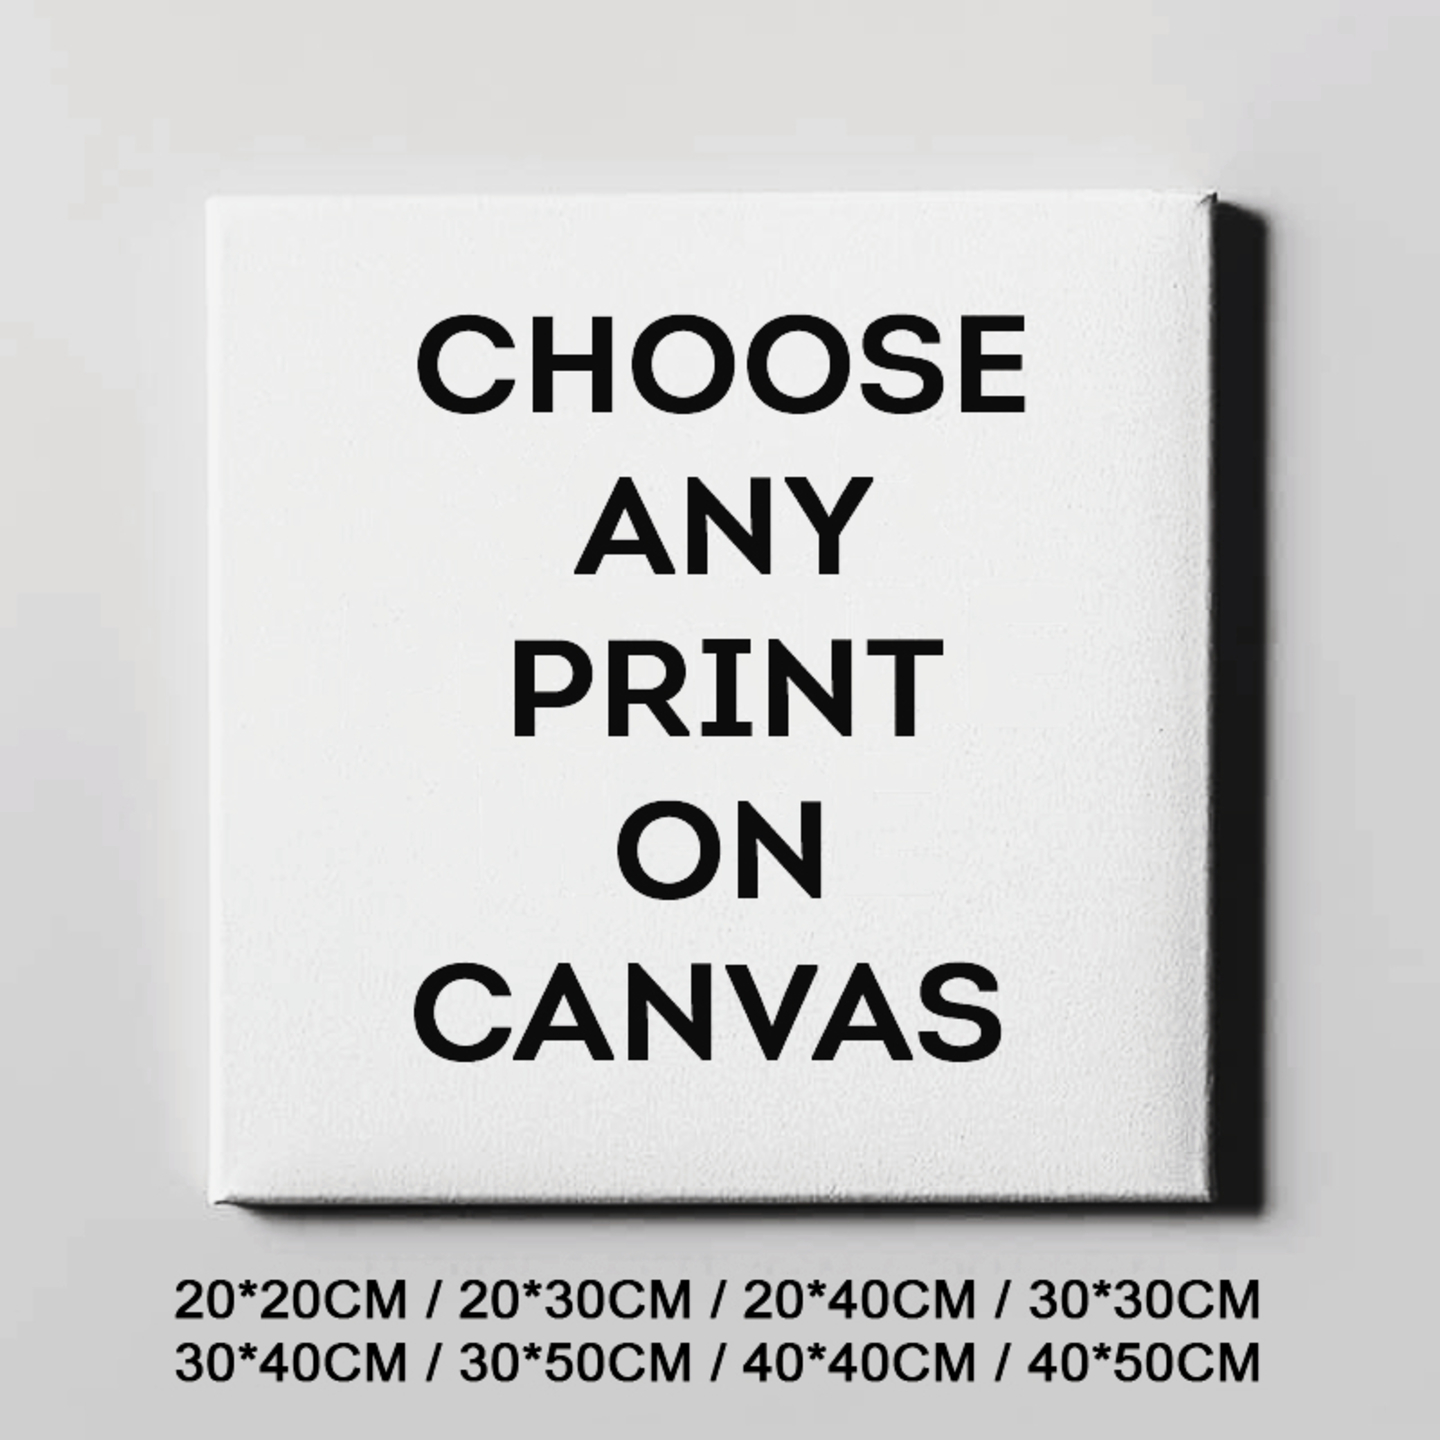 Canvas Printing Services - 3 type Roll  Wrapped  Framed - Custom print your photo logo on canvas